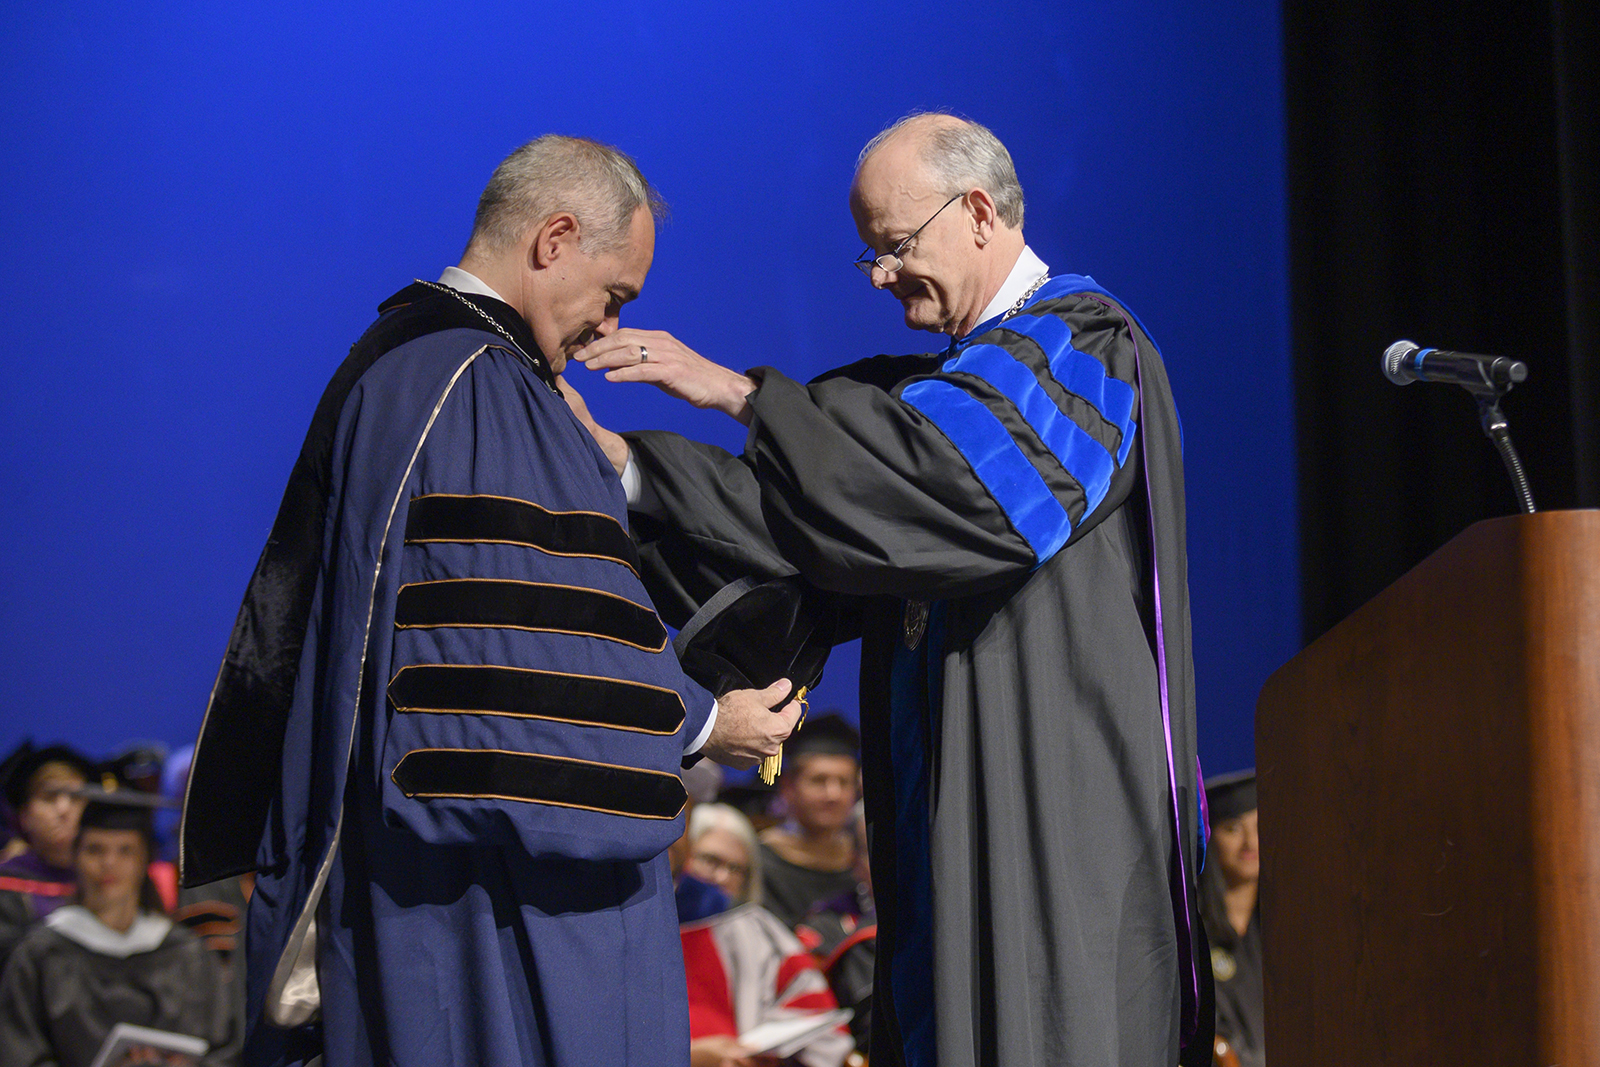 chancellor wrigley does official investiture